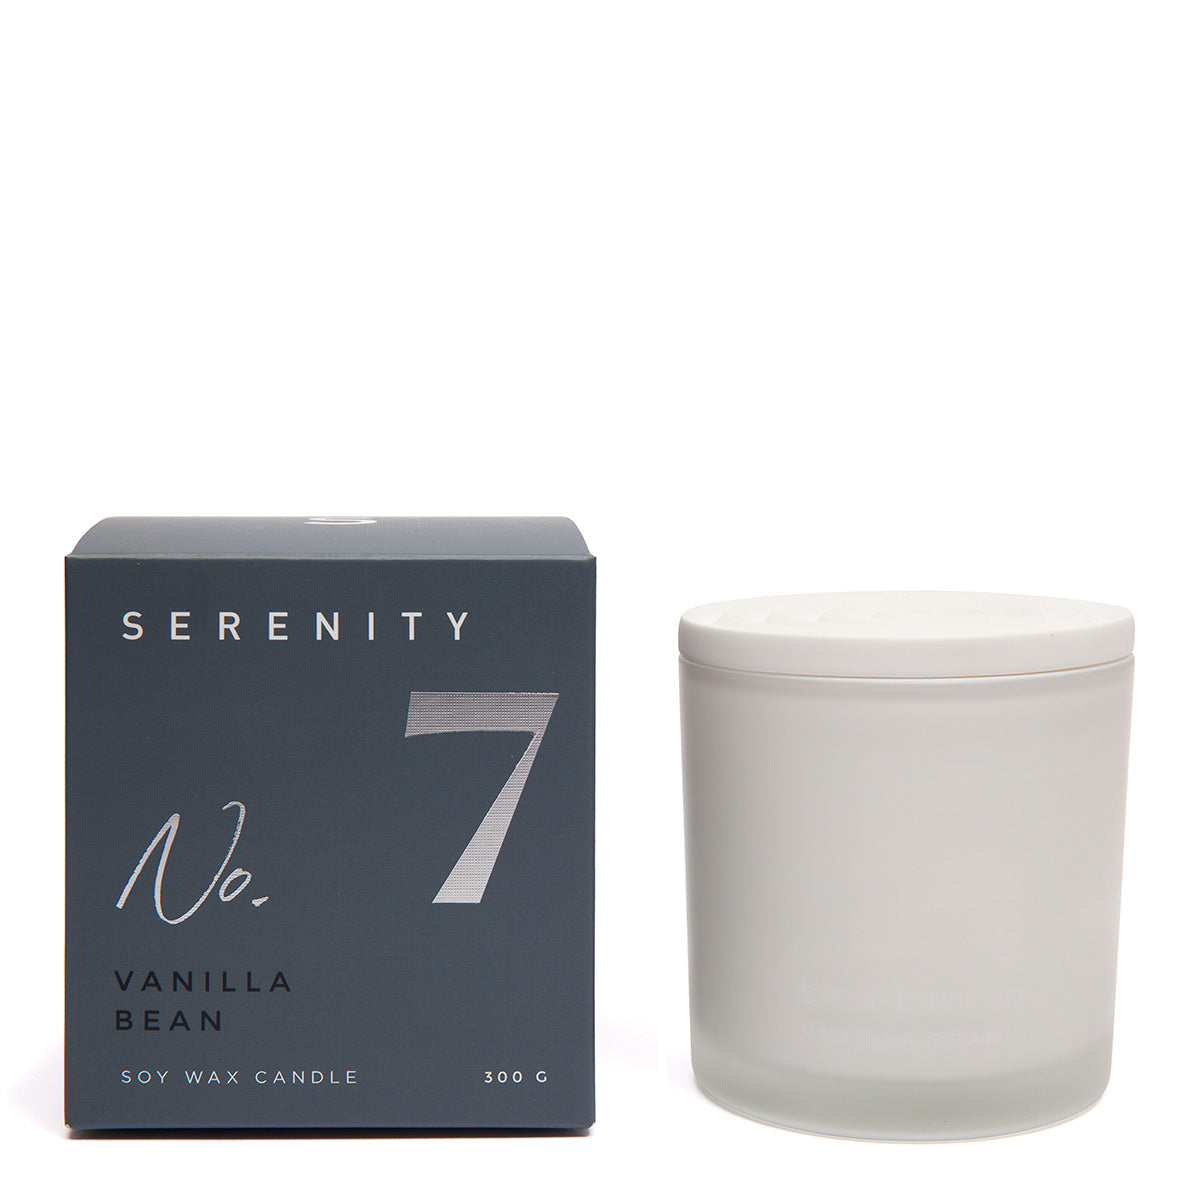 Serenity Core No7 Candle Vanilla Bean – Home Fragrance from BJs Furniture Horsham